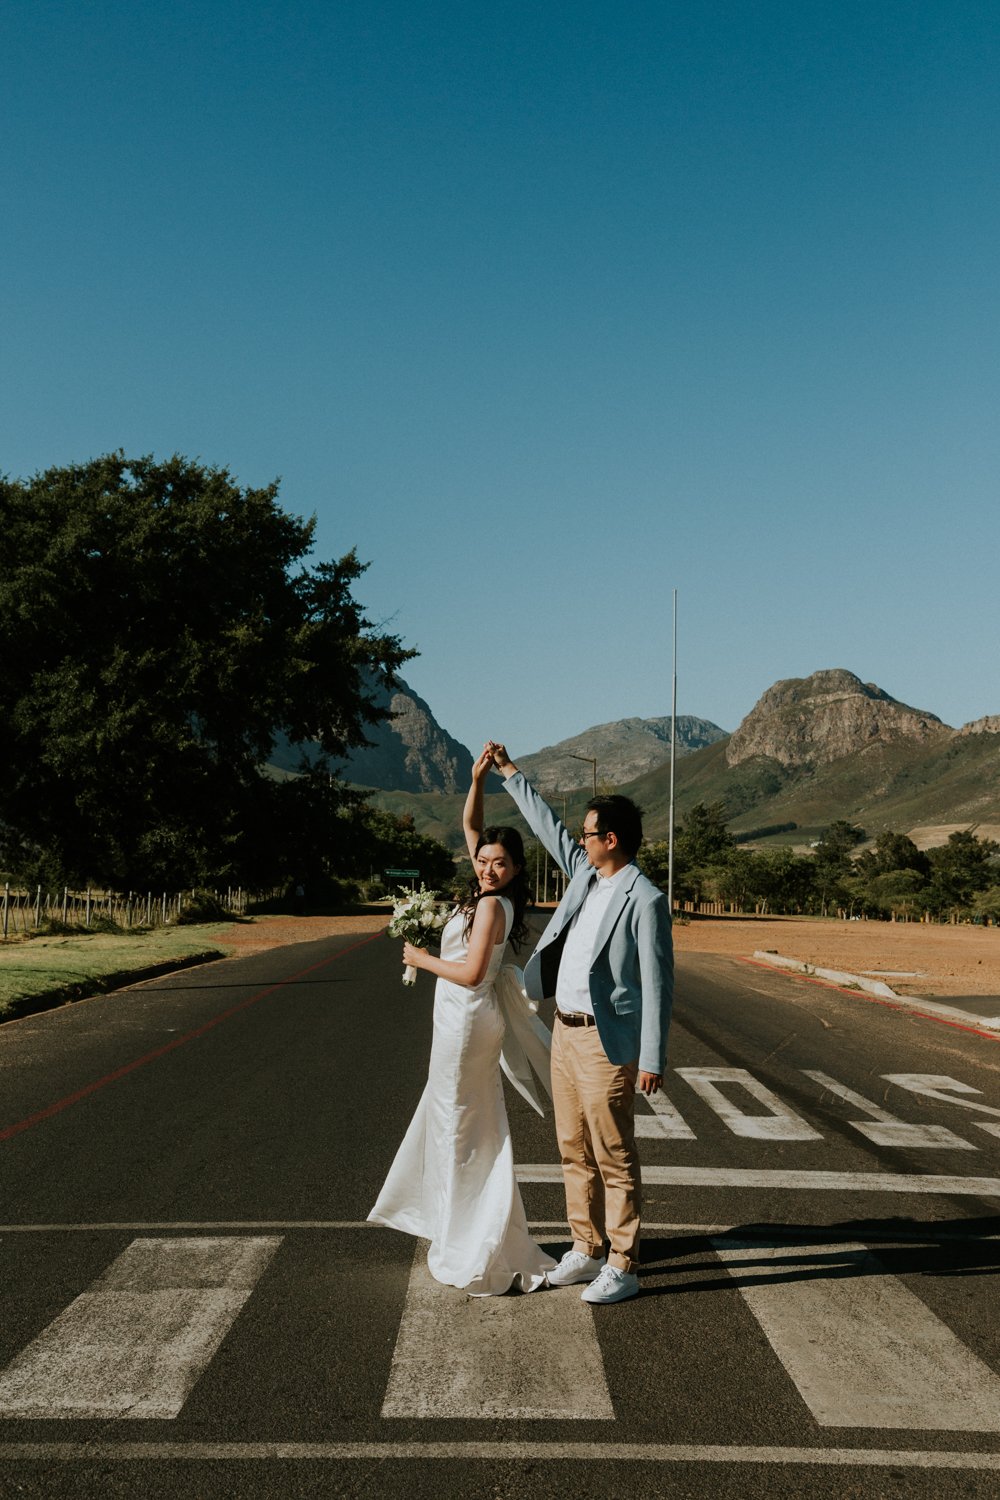 Wedding Shoot in Cape Town - Bianca Asher Photography-28.jpg